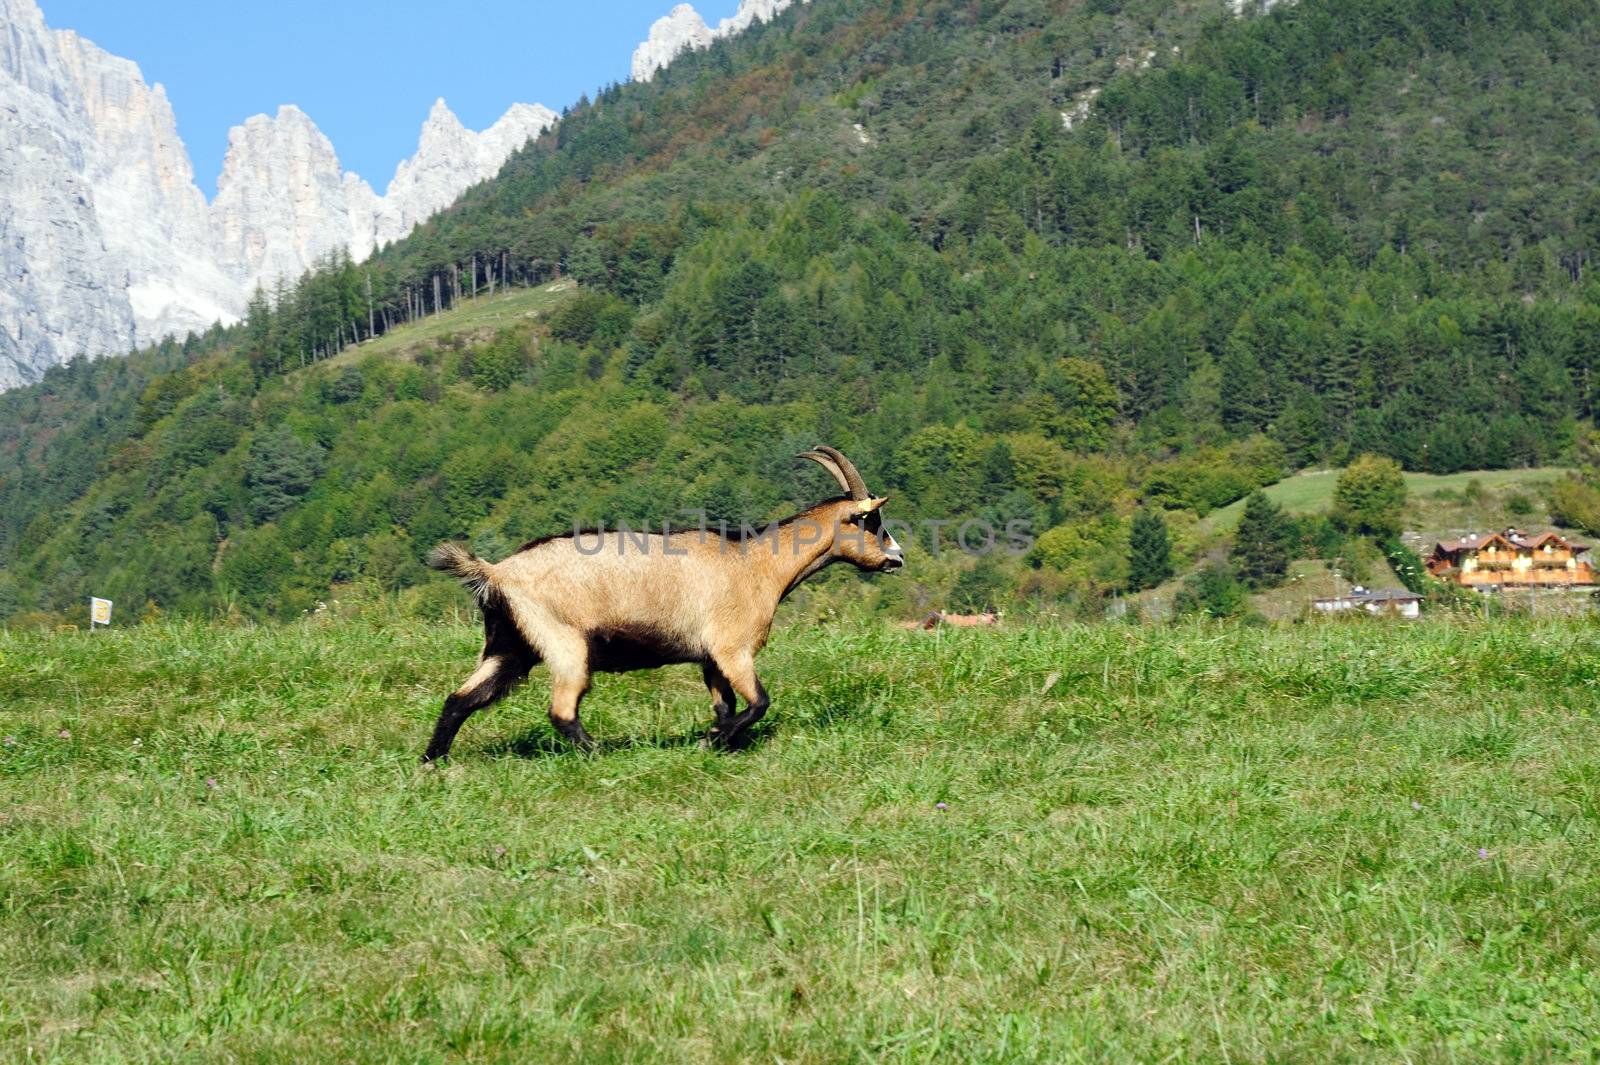 An image of a brown goat in the mountains